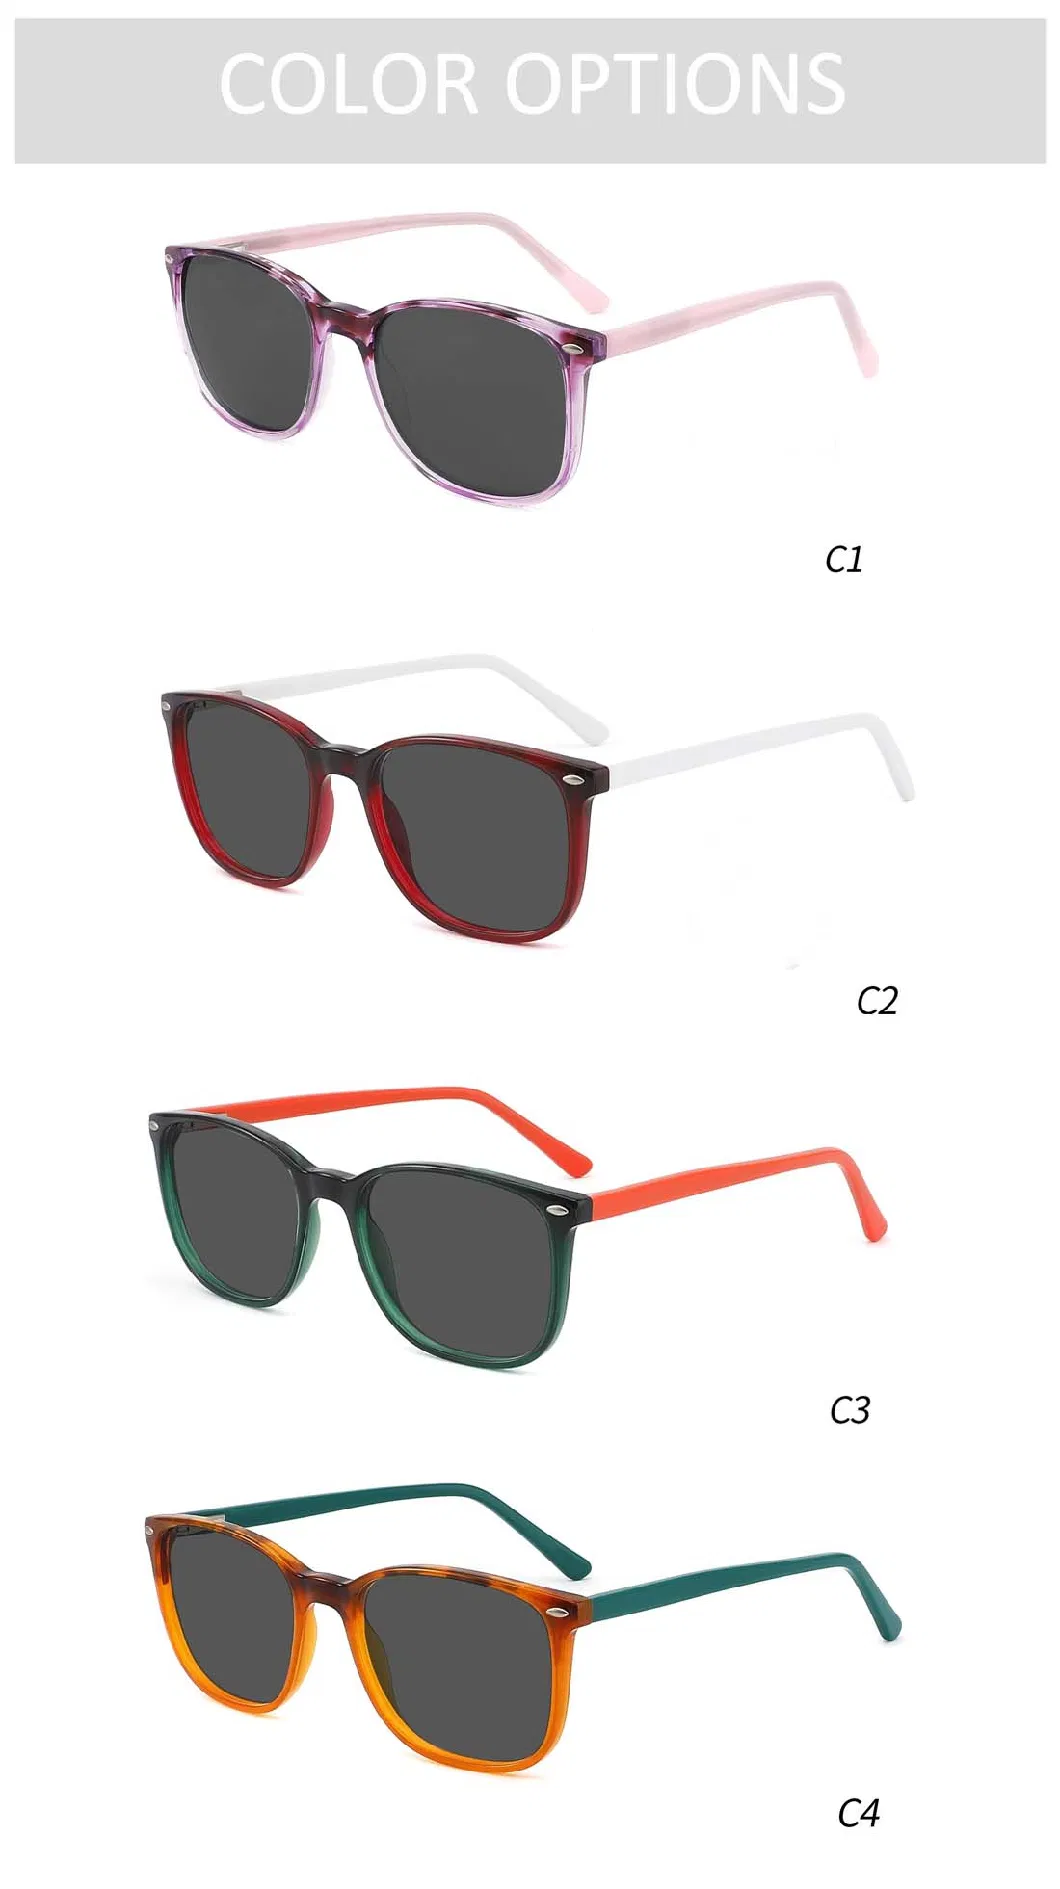 Gd New Trendy Acetate Colorful Sunglasses for Men and Women Fashionable Designer Style Sunglasses